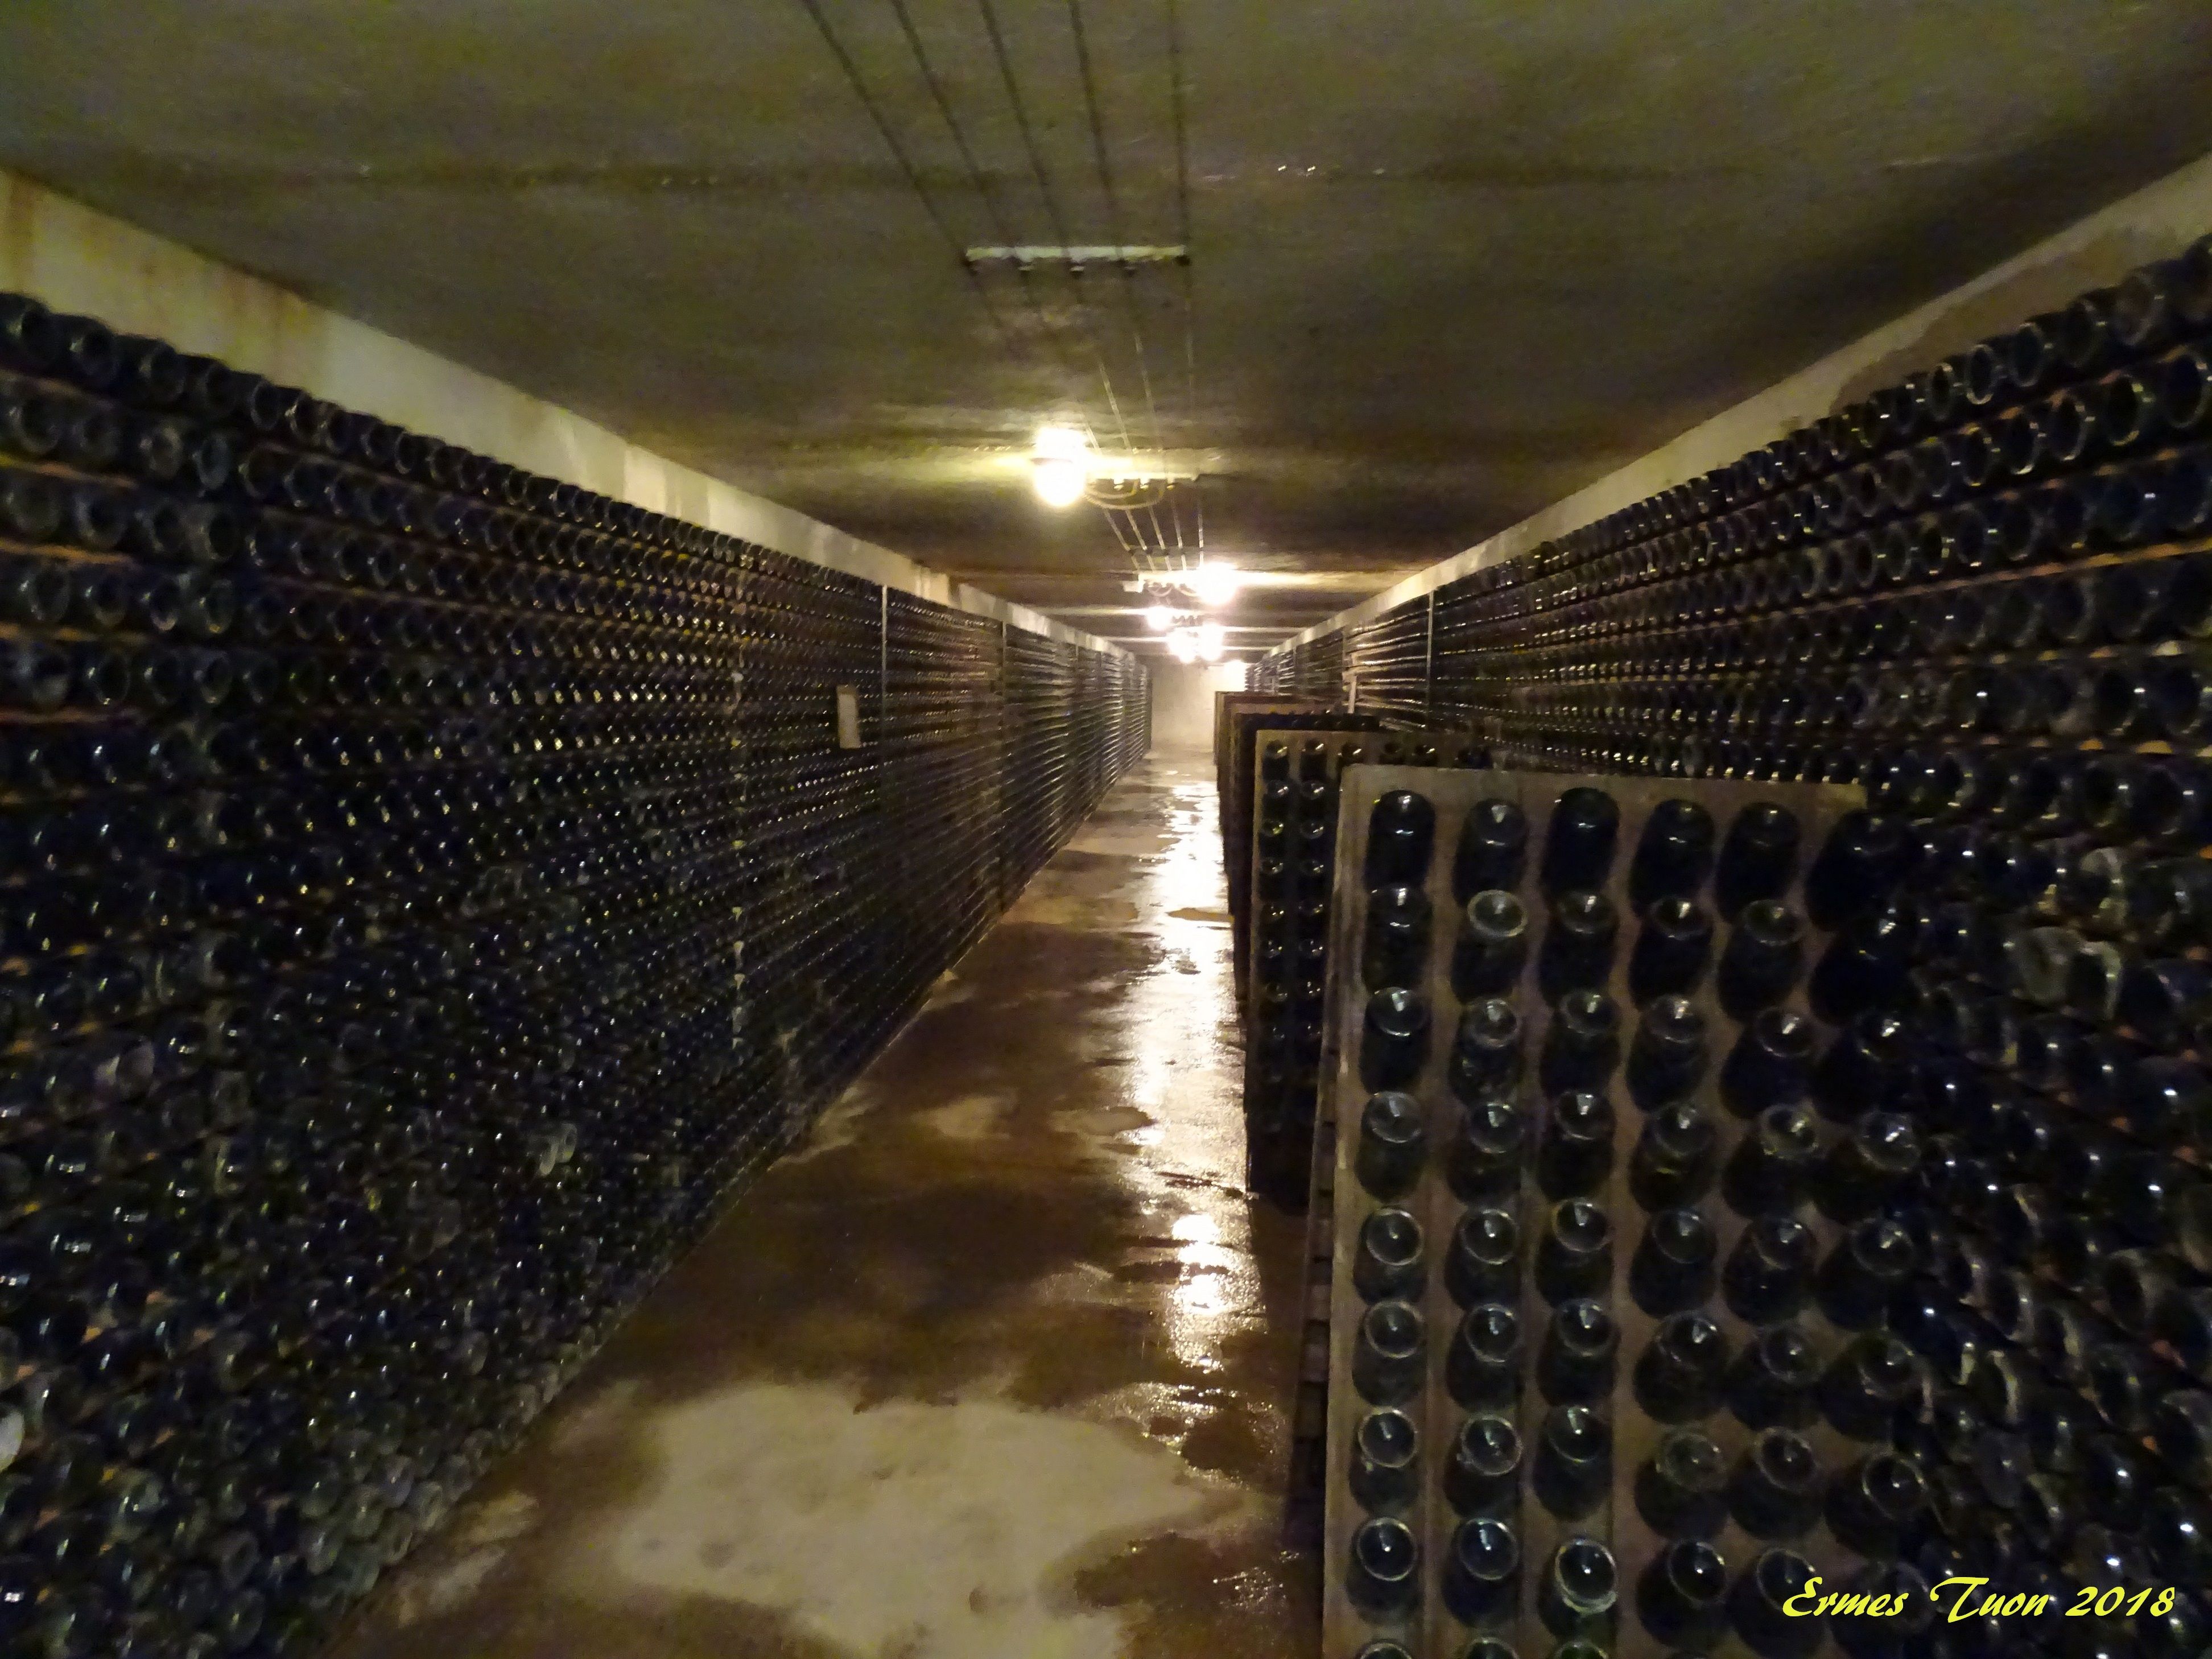 Caption - Bottles of wine aging in a gallery - from Ebbrezza Meet-up